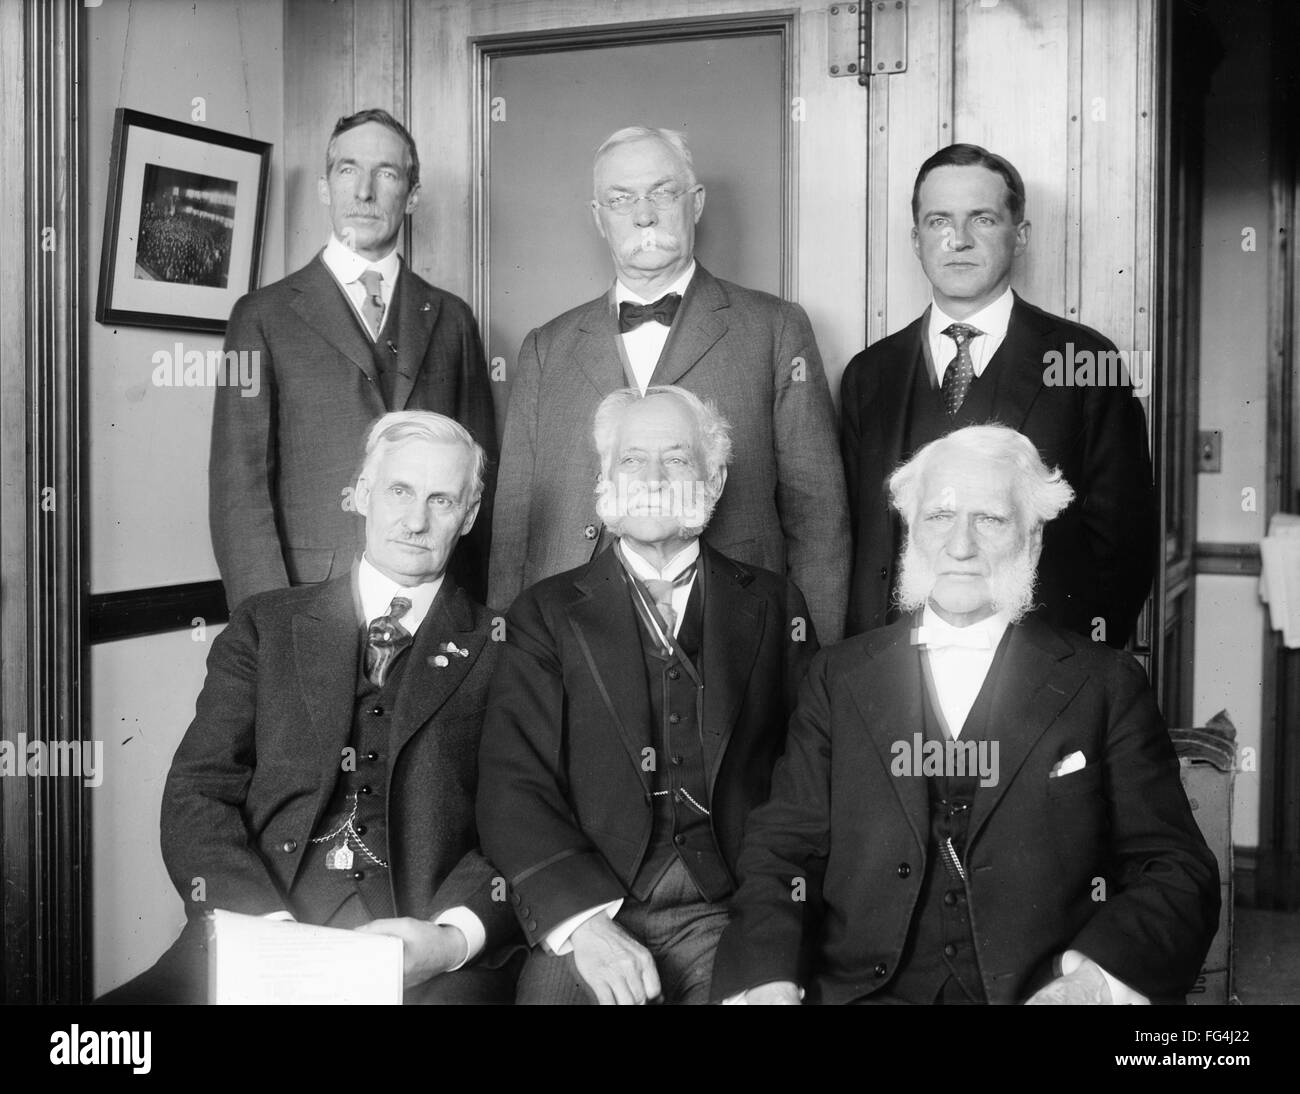 HENRY J. HEINZ (1844-1919). /nAmerican businessman and founder of the H.J. Heinz Company. Seated center, with Marion Lawrence and Bishop Joseph Crane Hartzell; back row: F.L. Brown, S.P. Leet, Reverend J.G. Holdcroft. Photograph, c1915. Stock Photo